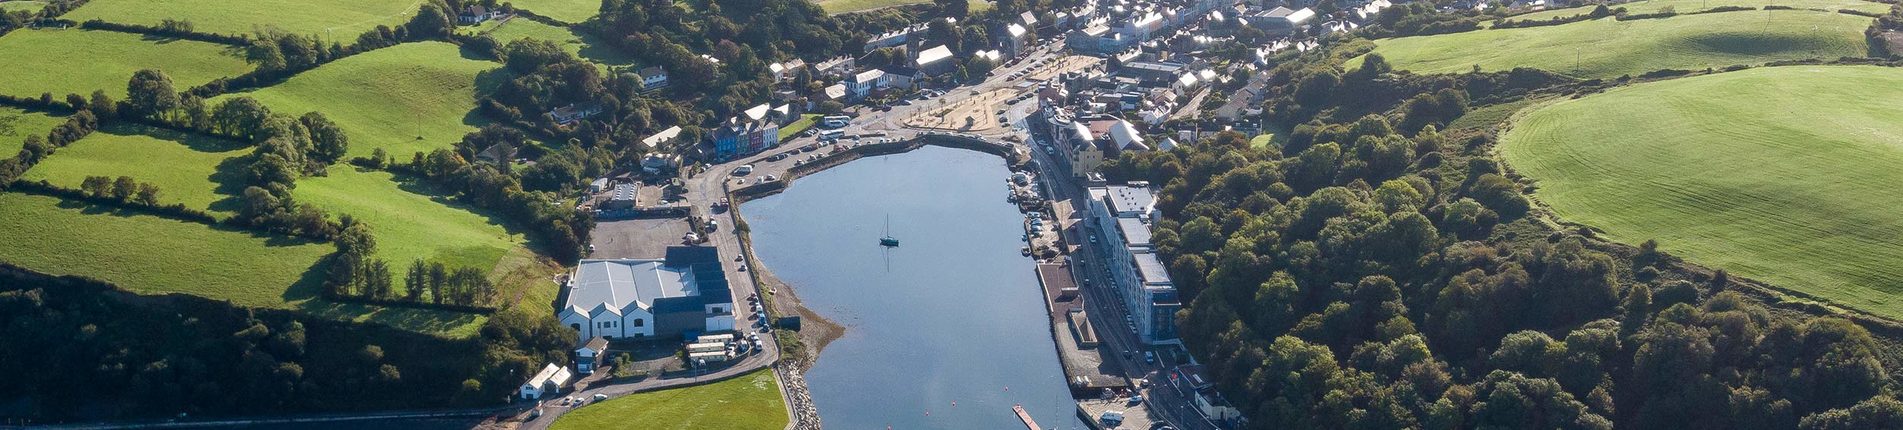 Bantry Bay Harbour 